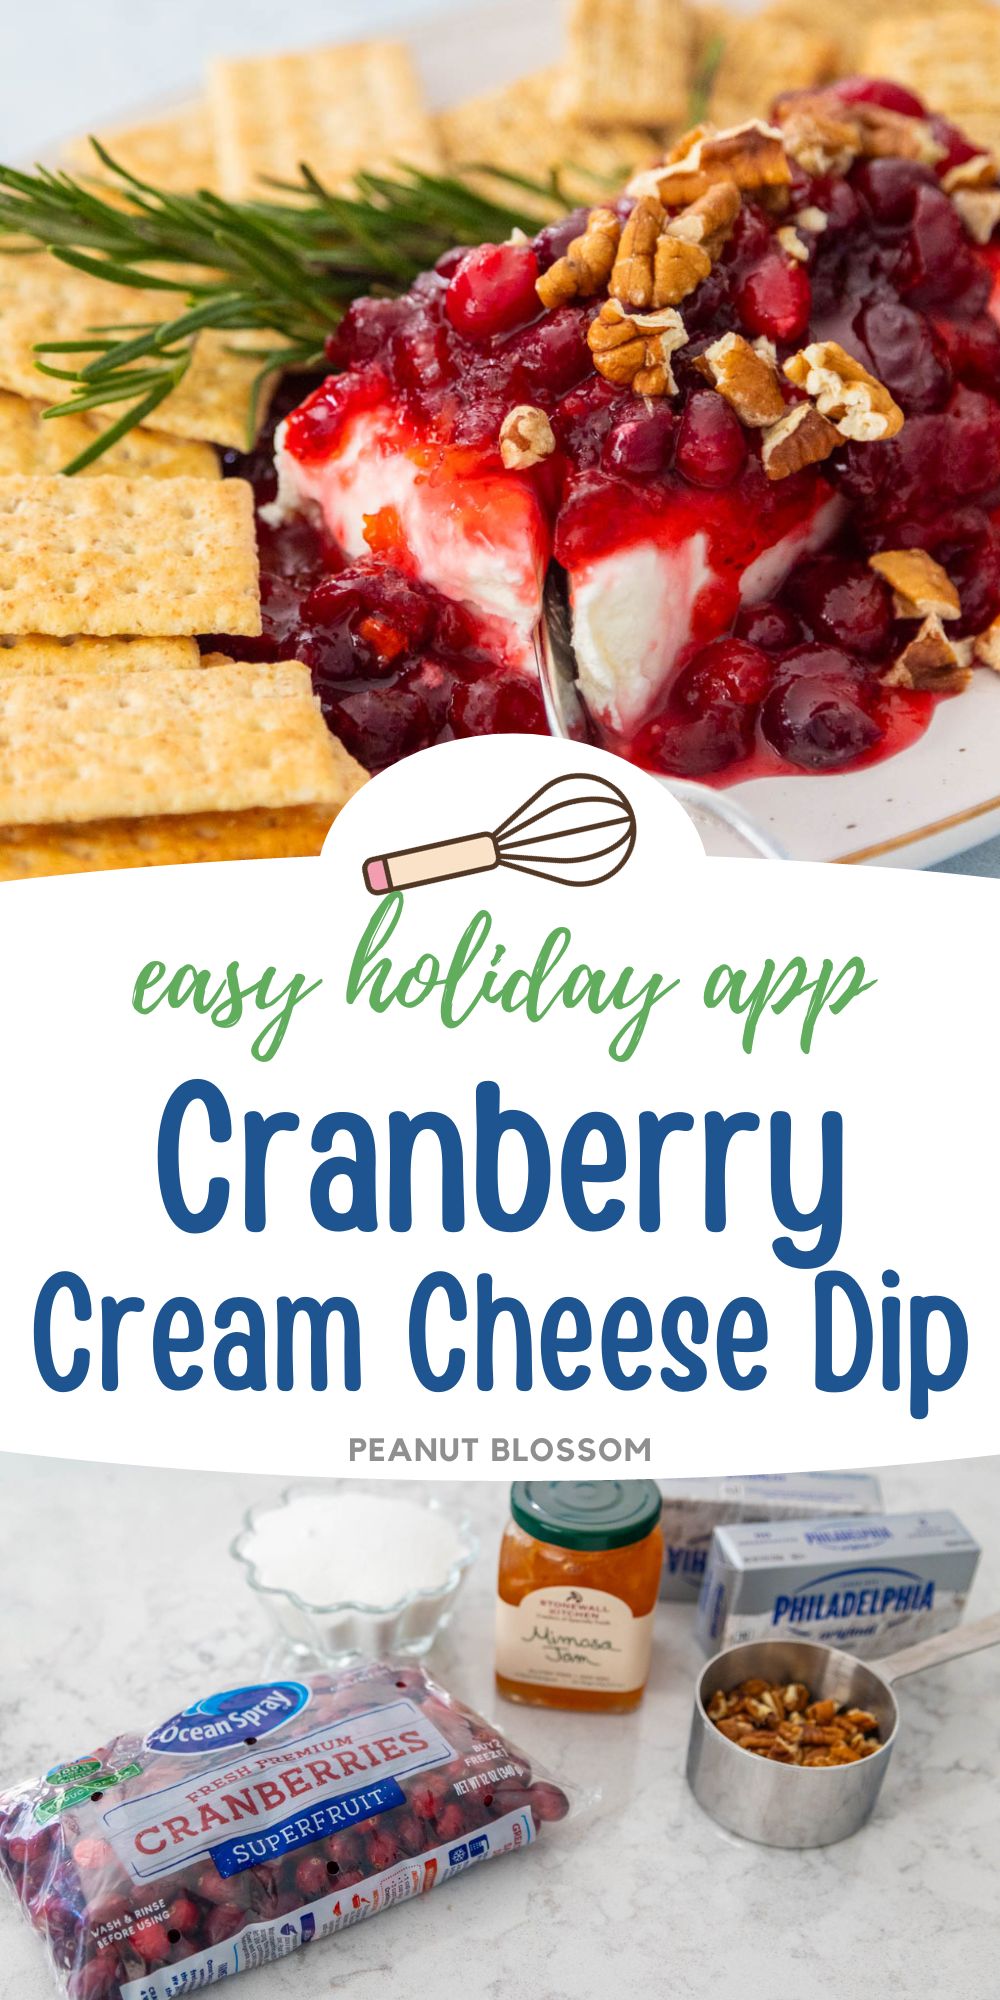 The photo collage shows the cranberry dip with crackers next to a photo of the ingredients used to make it.